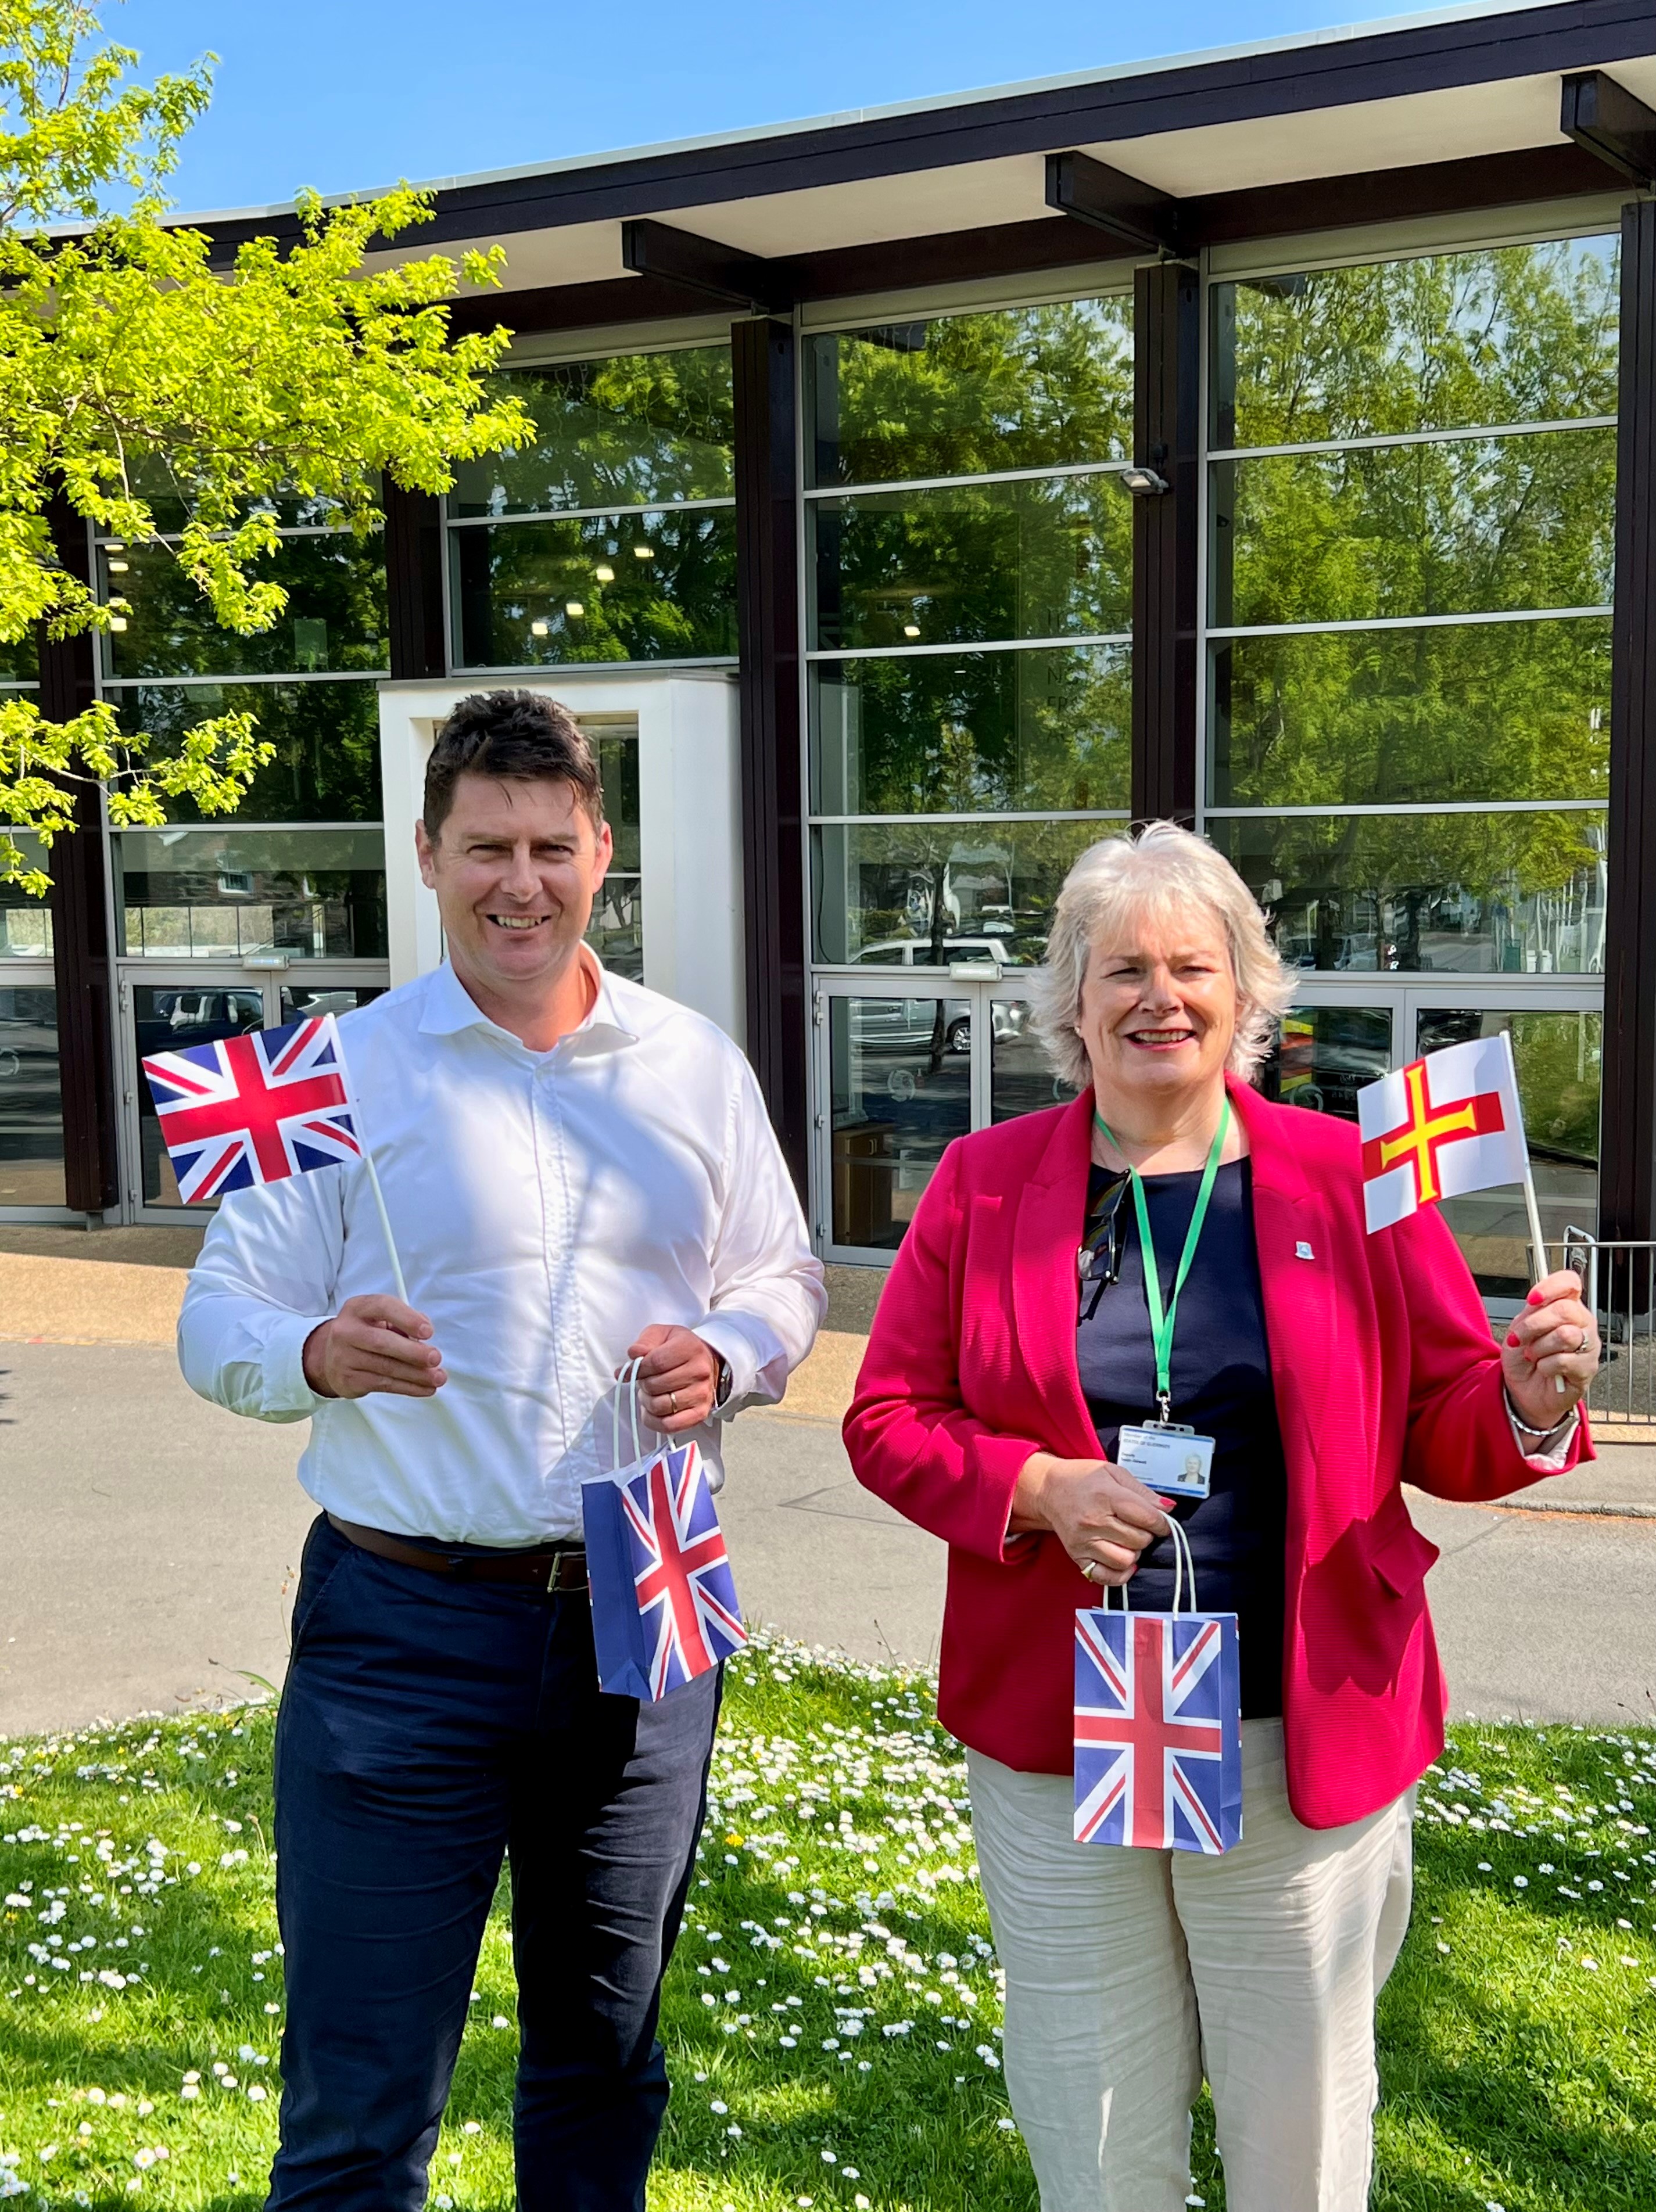 Sue Aldwell joined by Glen Tonks of Credit Suisse pictured outside Beau Sejour Leisure Centre holding their activity packs and biodegradable flags.